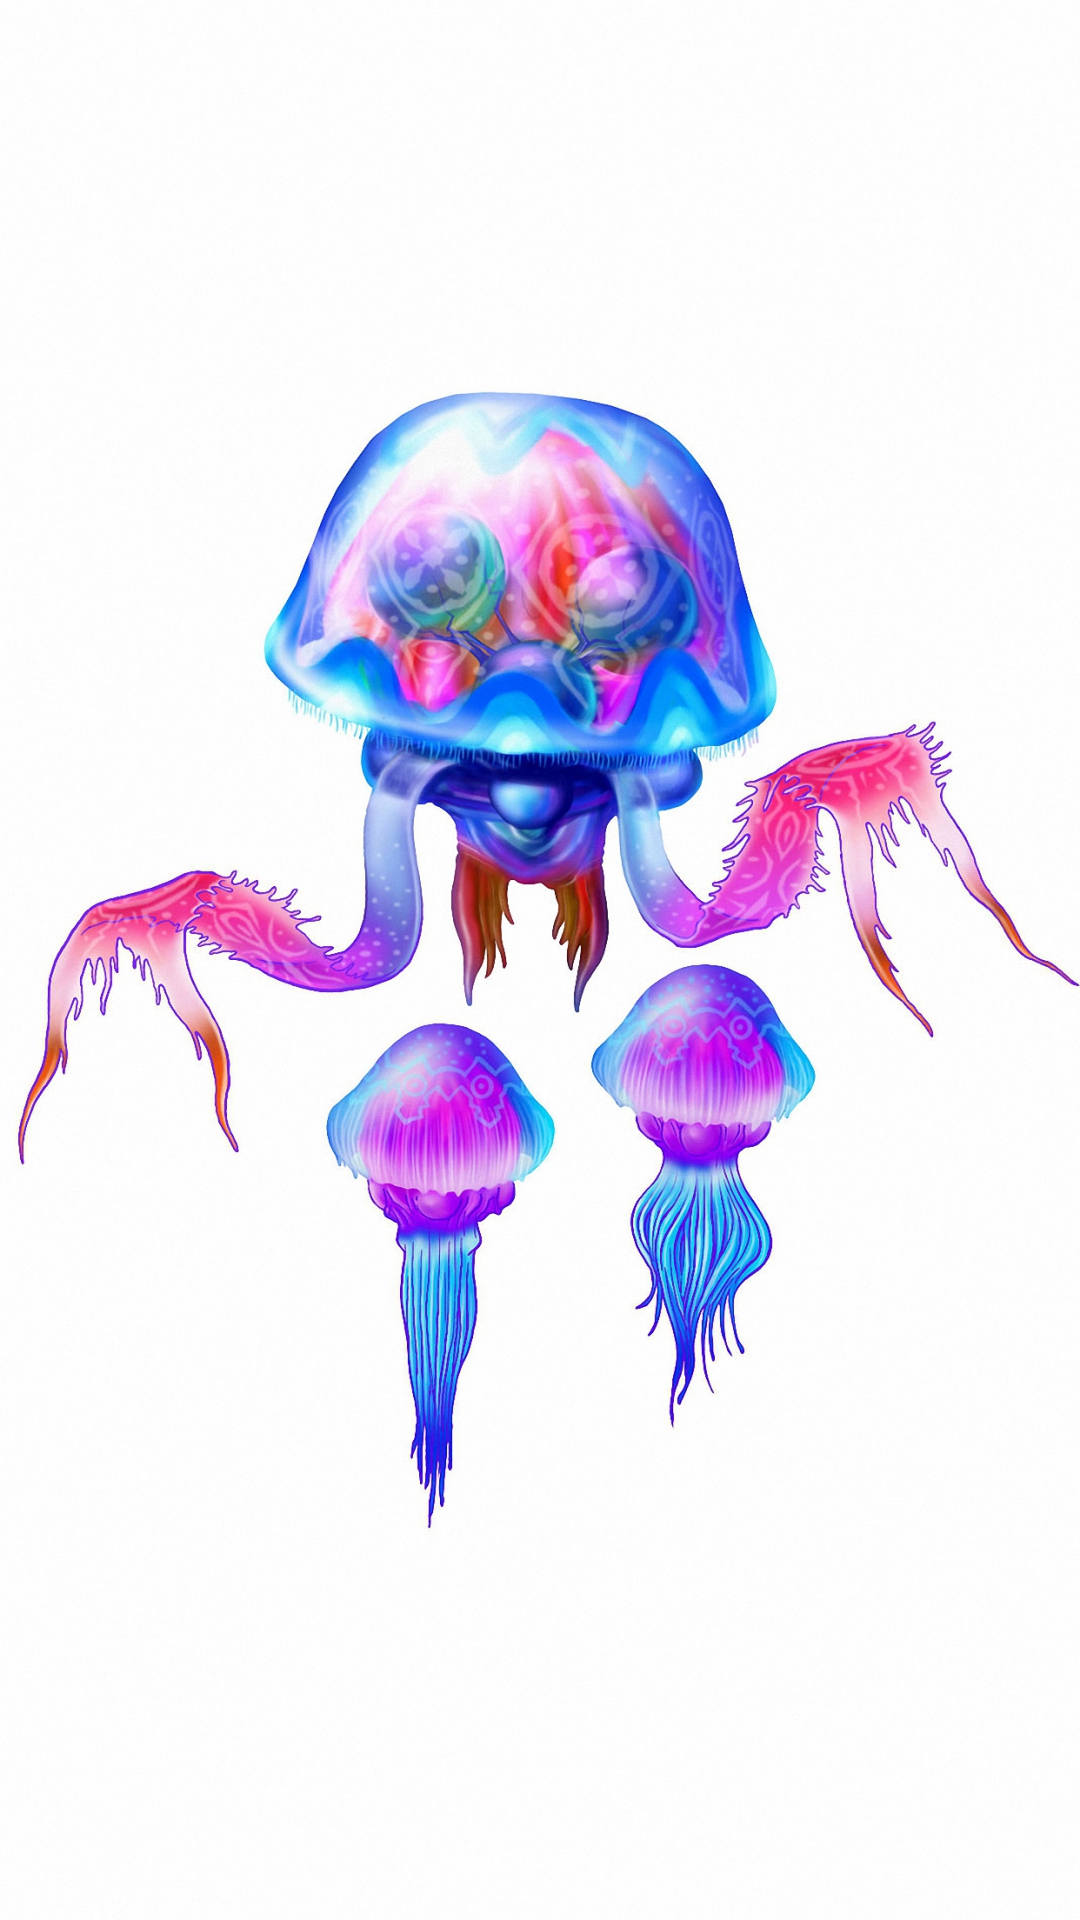 Plus HD Colorful 3d Jellyfish iPhone 6s Wallpaper